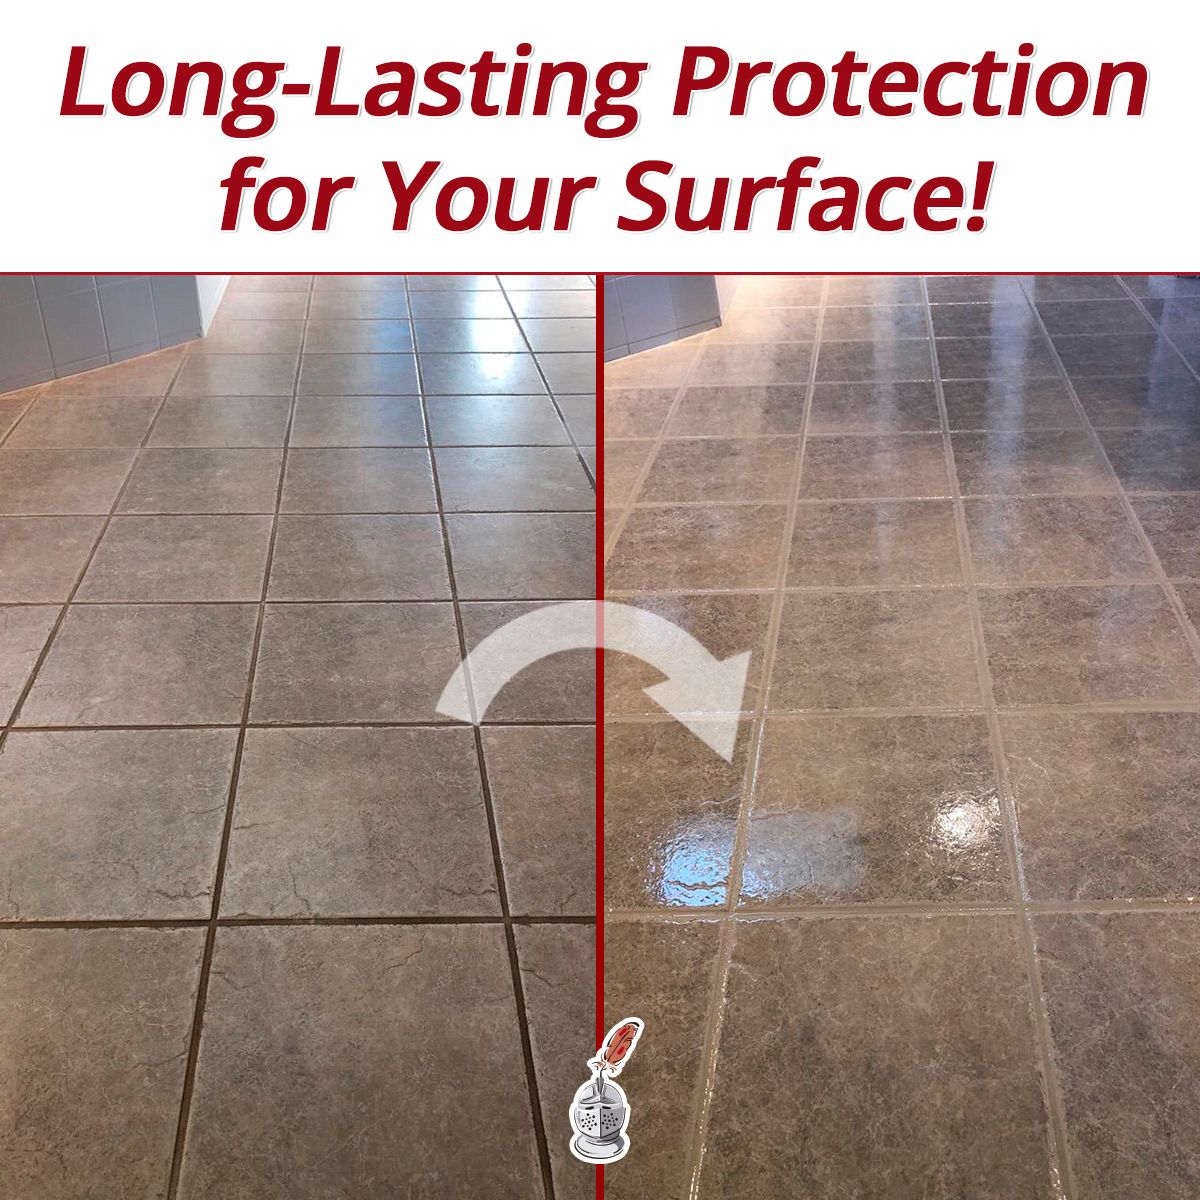 Long-lasting Protection for Your Surface!